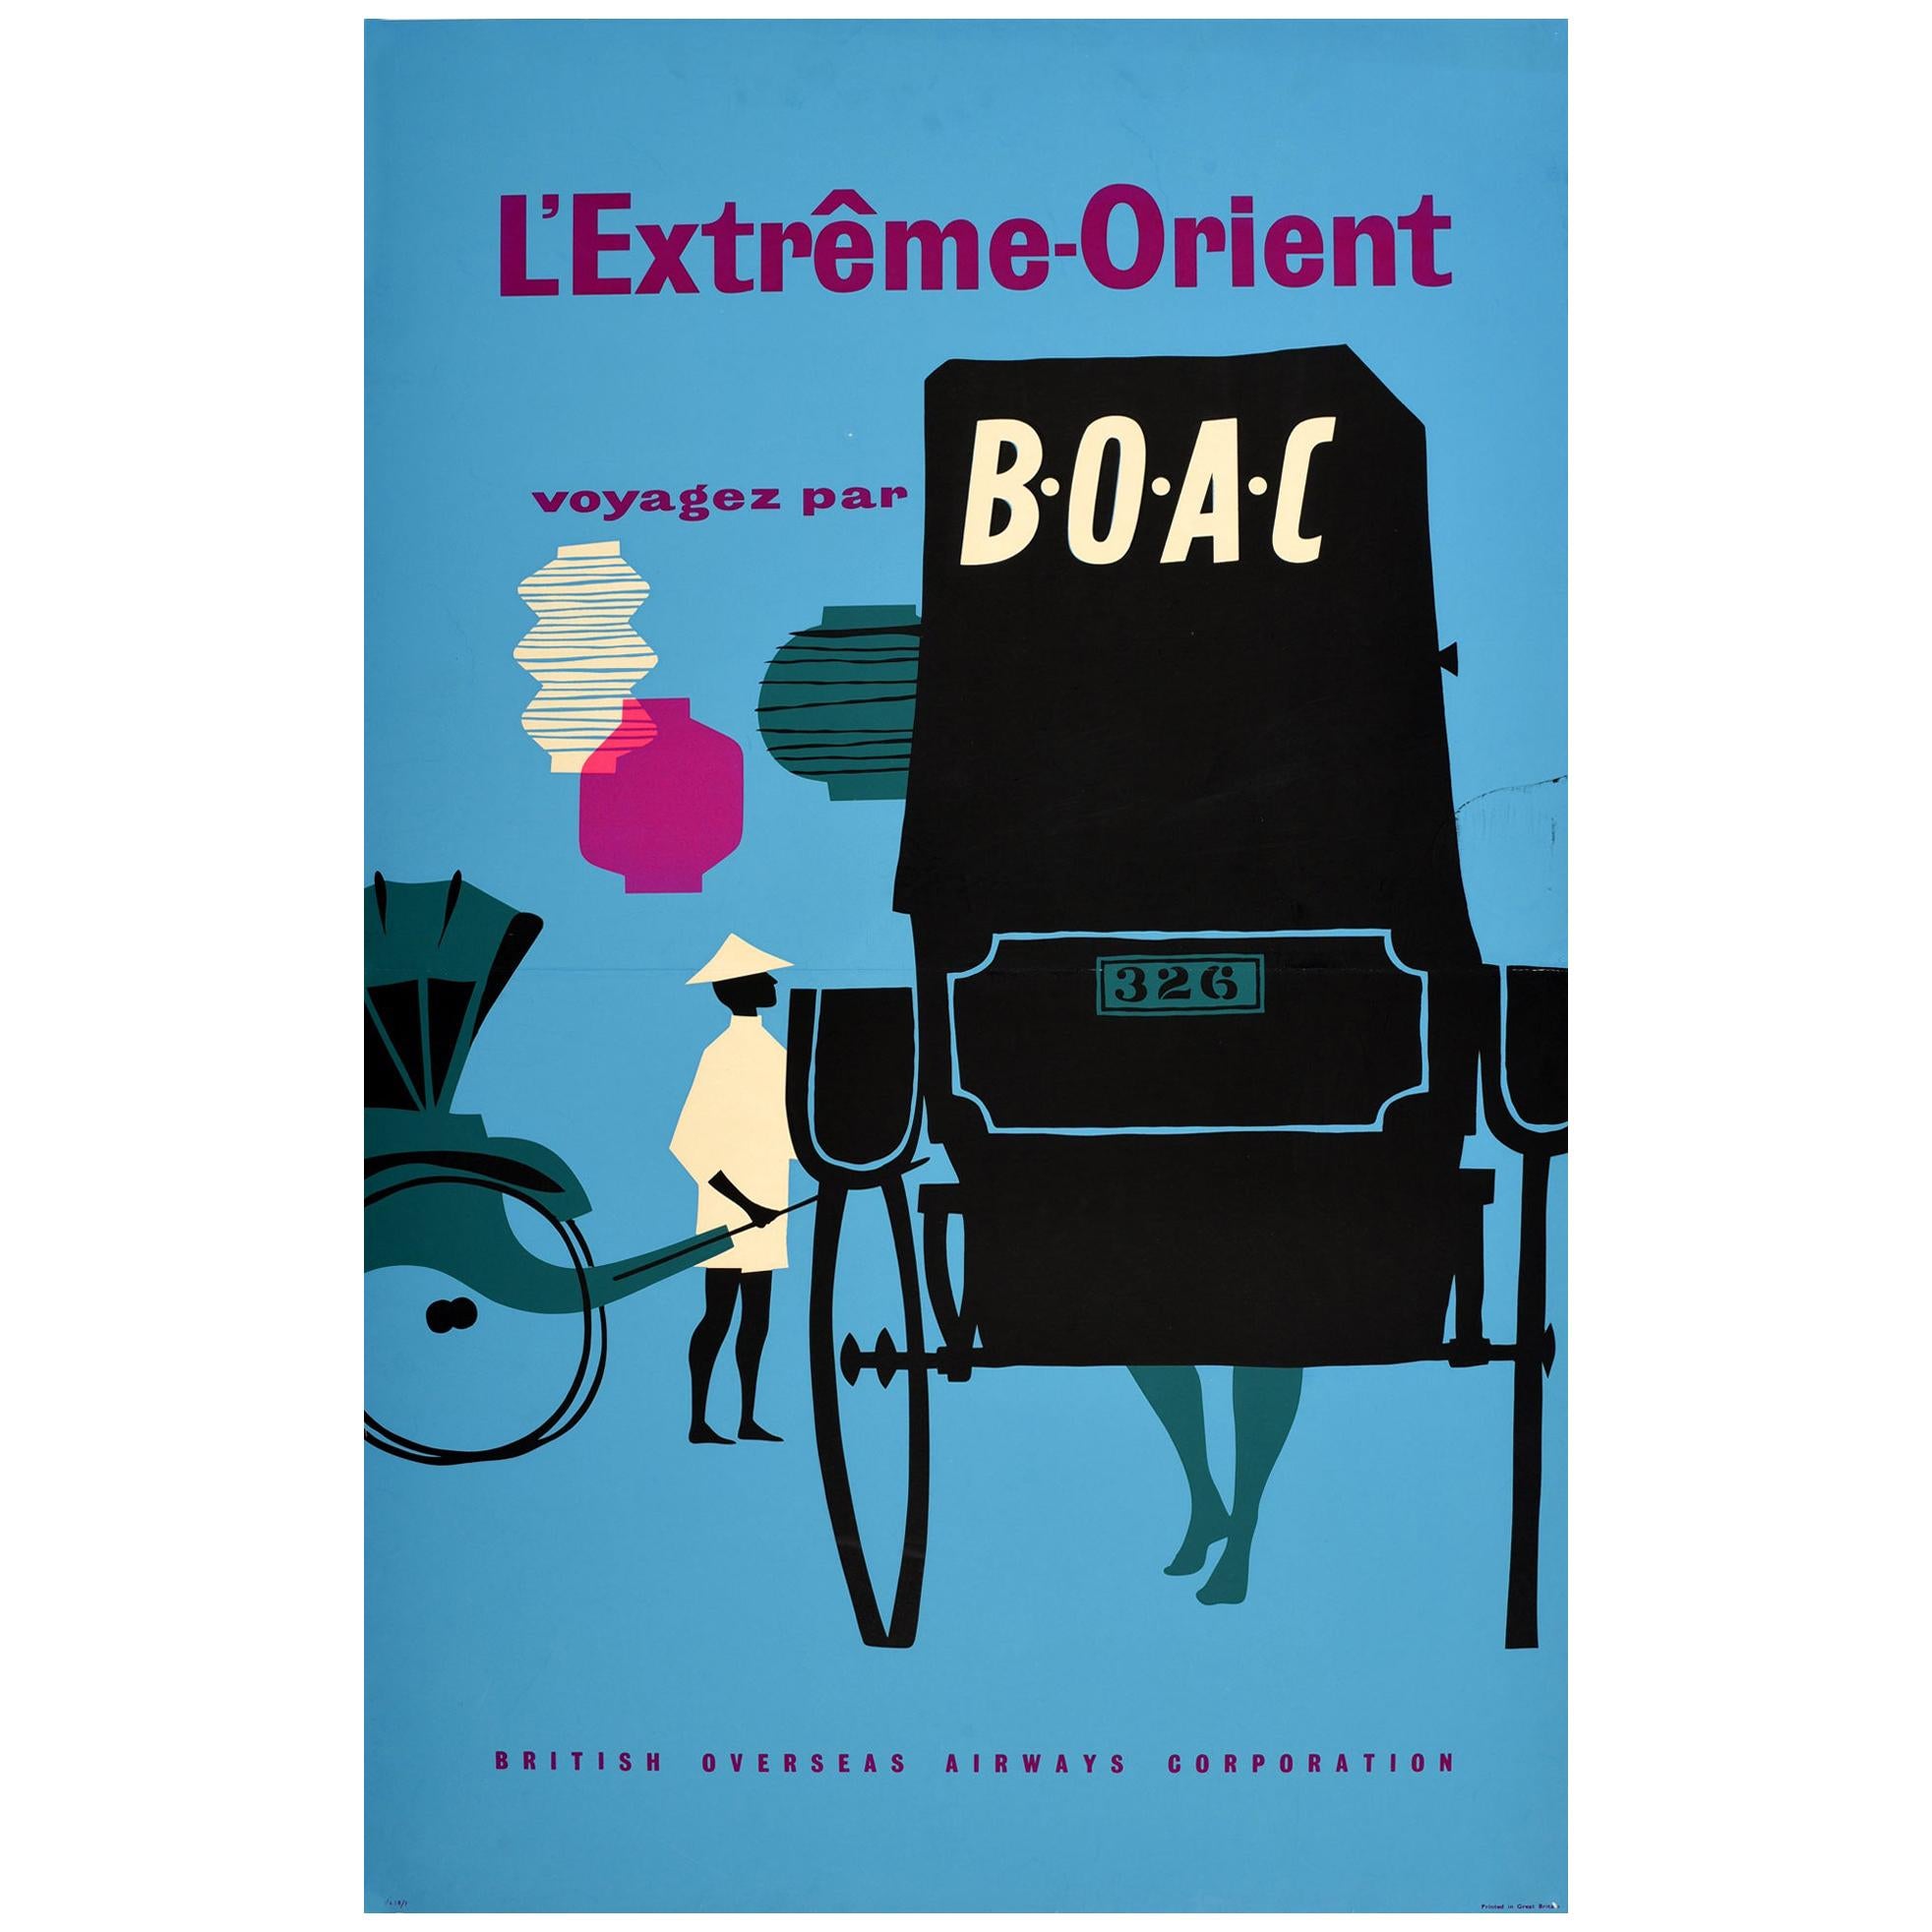 Original Vintage Midcentury Travel Poster Far East Fly by BOAC L'Extreme-Orient